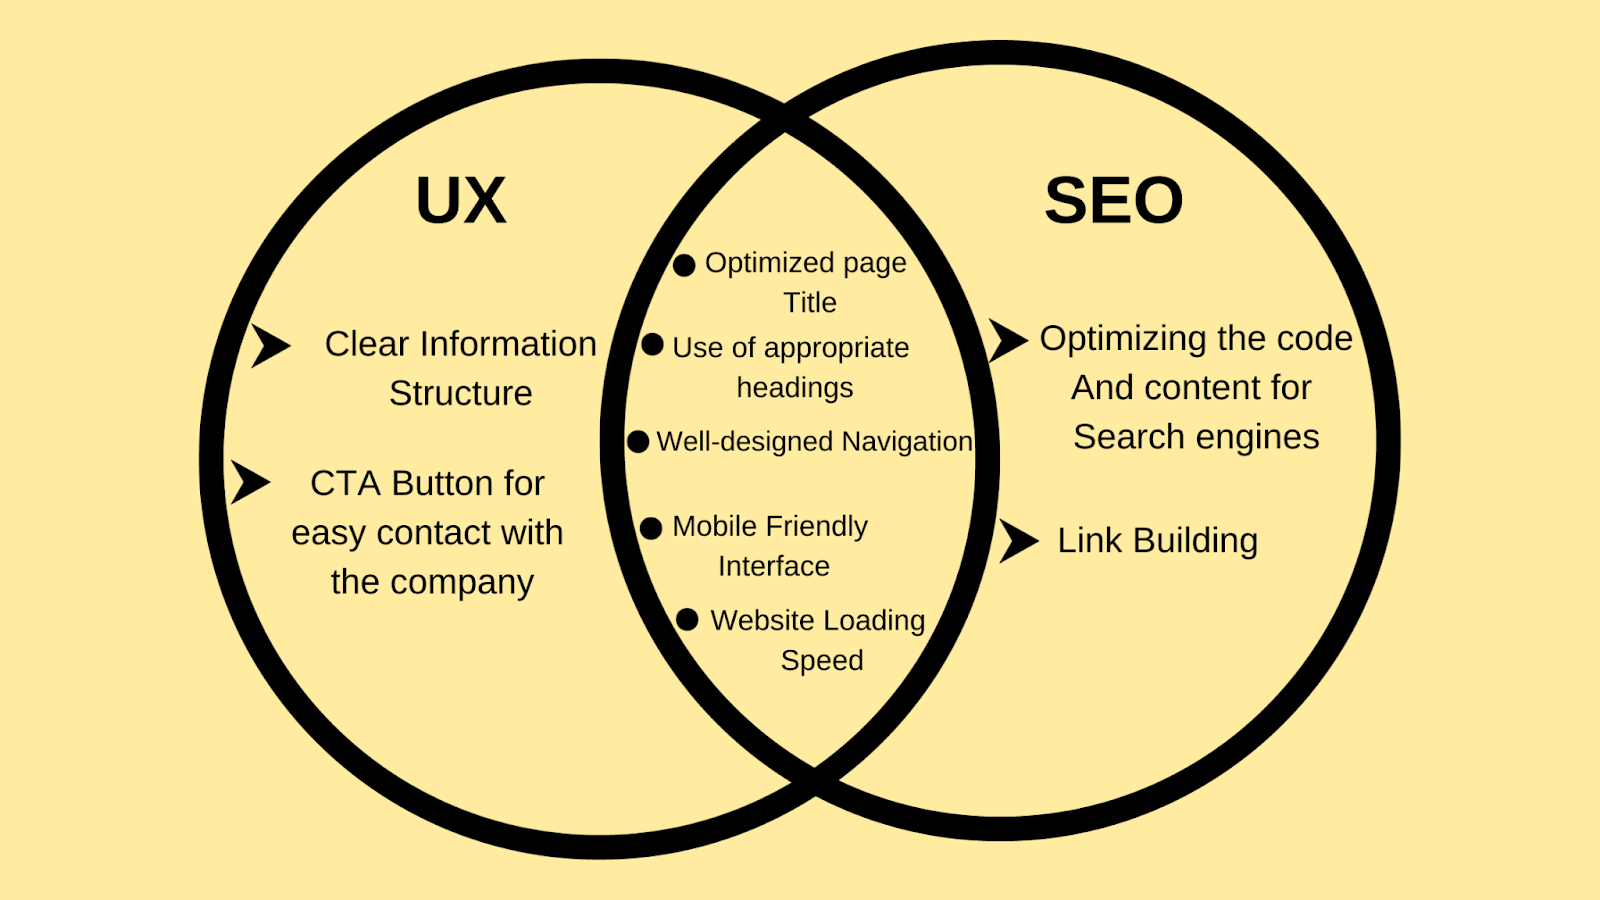 vein diagram of finding commons between SEO and User Experience design approach.